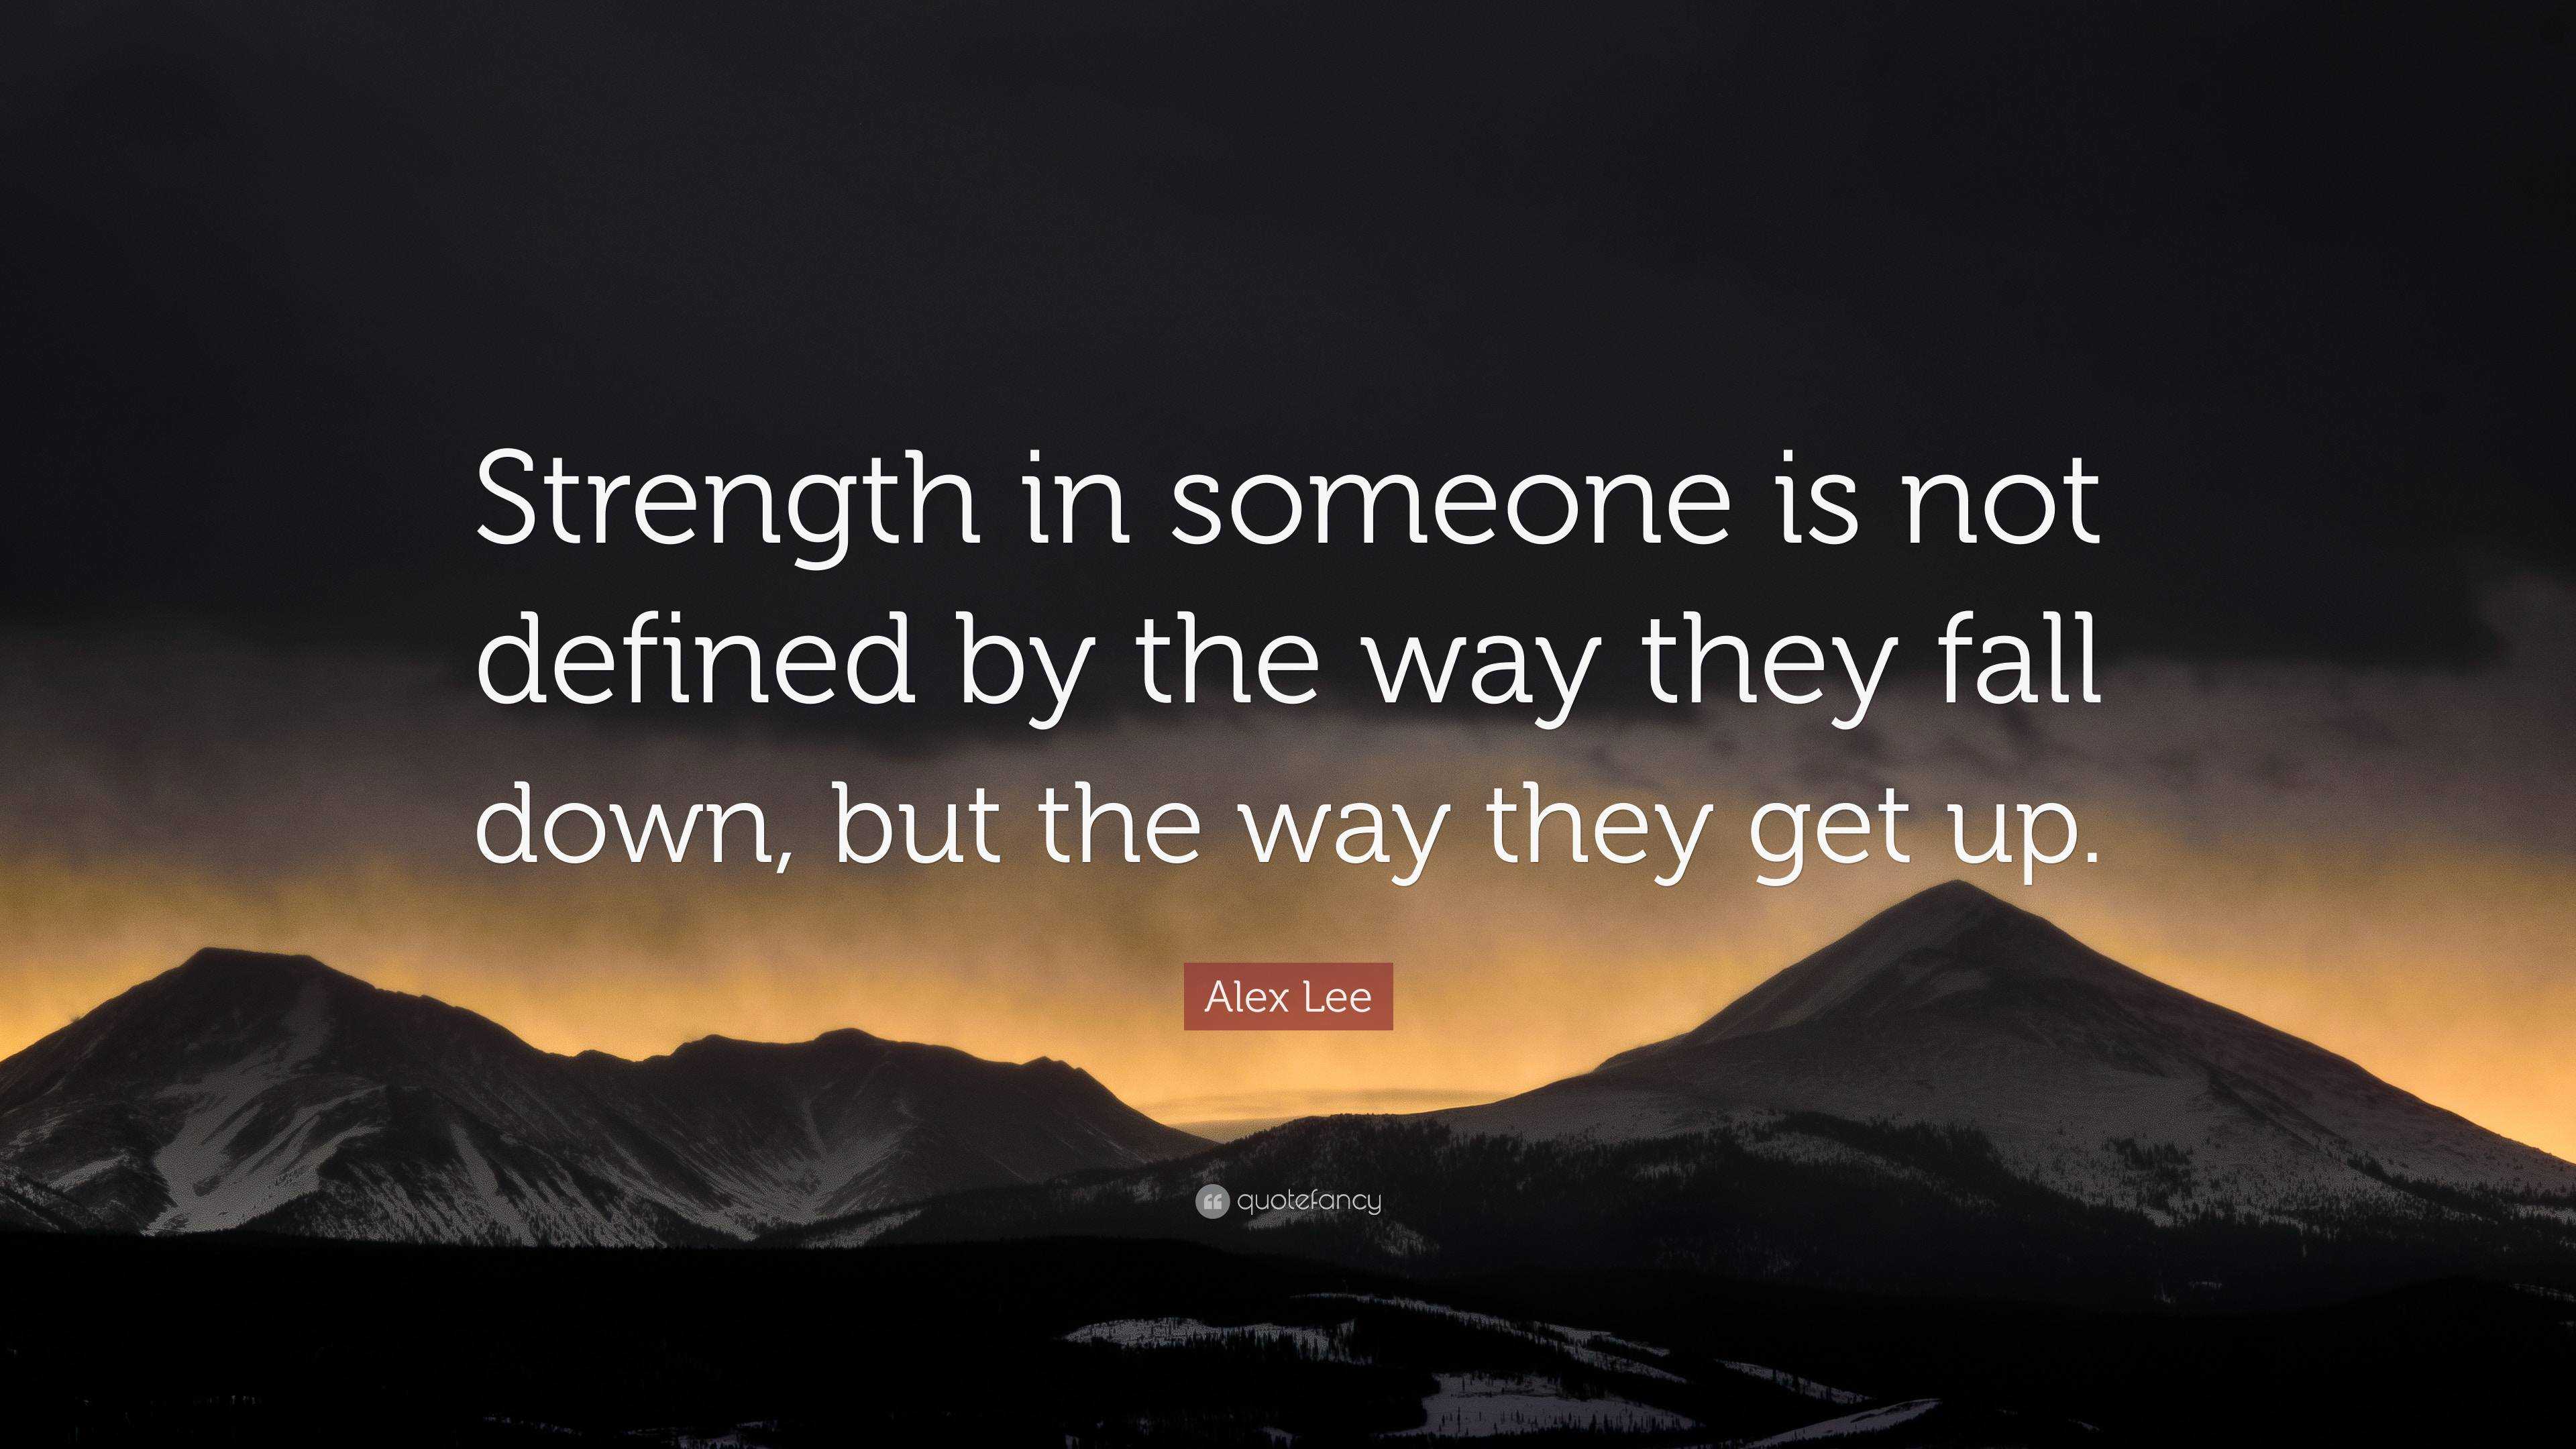 Alex Lee Quote: “Strength in someone is not defined by the way they ...